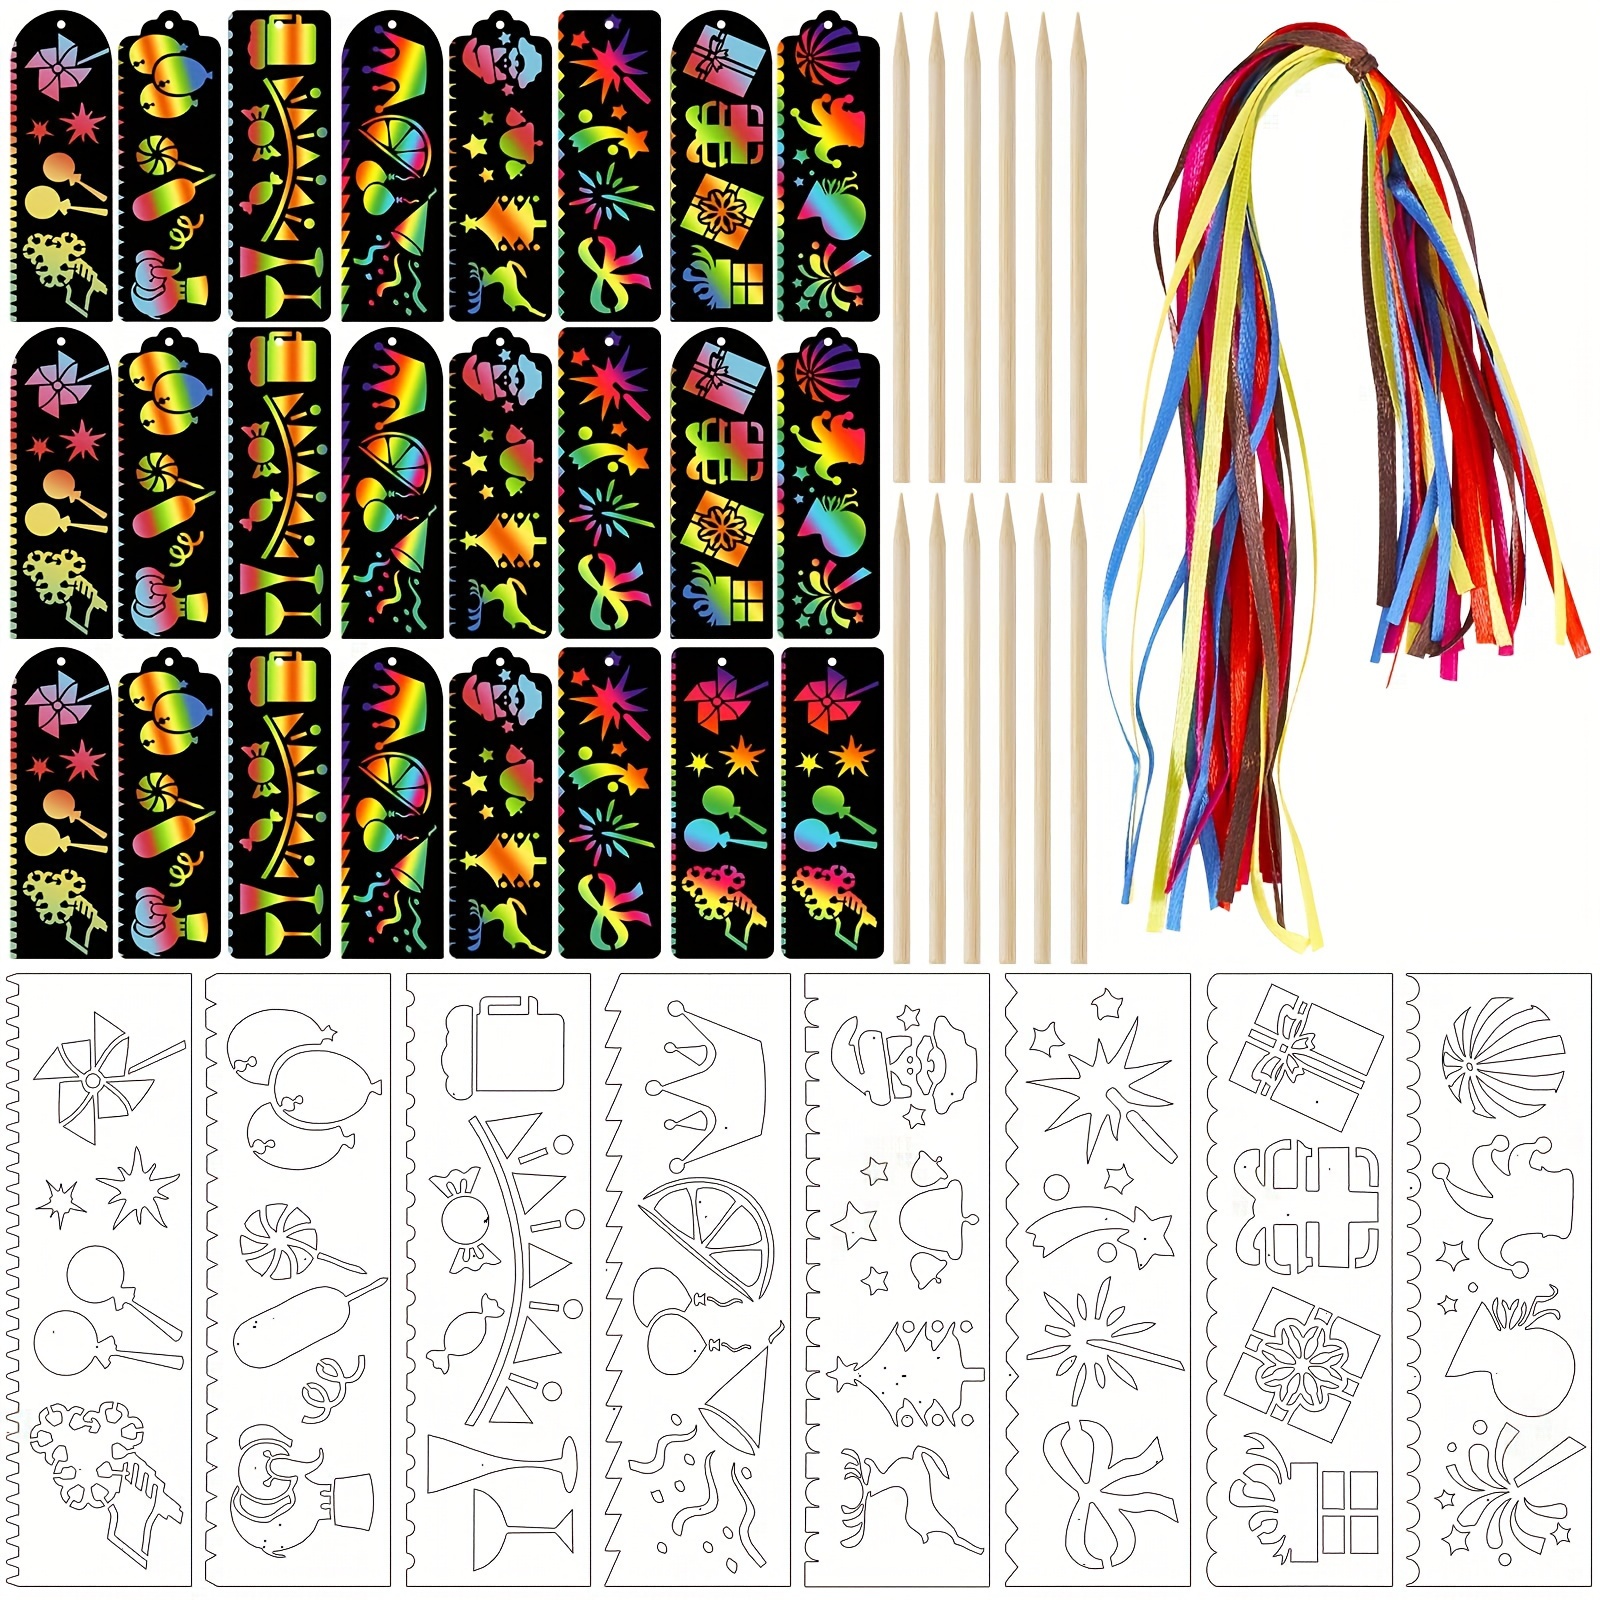 

24 Pcs Scratch Art Bookmark Set - Rainbow Scratch Paper Kit With Wooden Stylus, Colorful Ribbons & Drawing Templates For Diy Crafts, Classroom Activities, Party Favors & Gifts